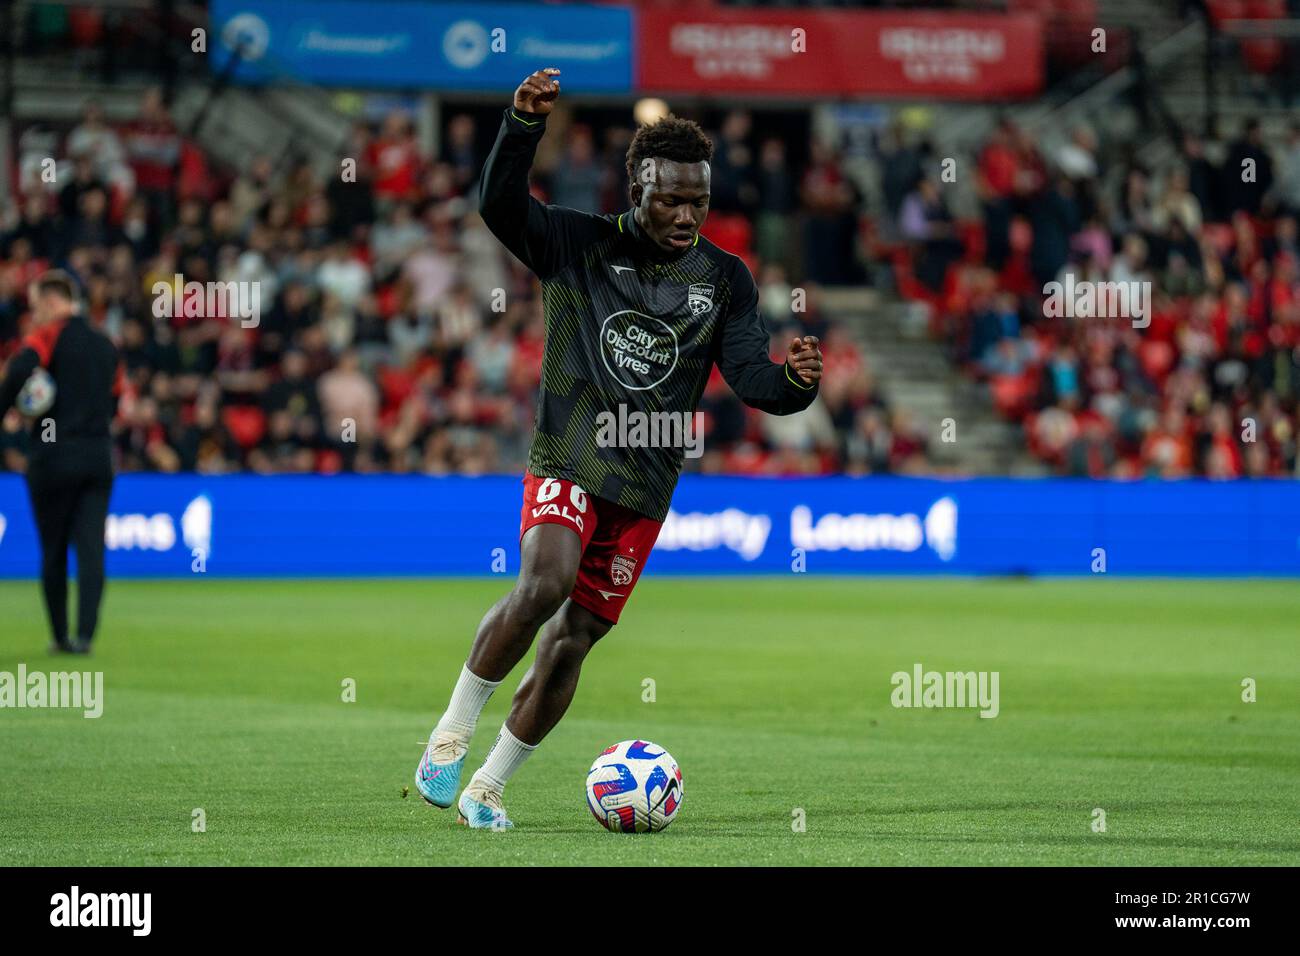 https://c8.alamy.com/comp/2R1CG7W/adelaide-australia-13th-may-2023-adelaide-south-australia-may-13th-2023-nestory-irankunda-66-adelaide-united-warms-up-during-the-first-game-of-the-isuzu-ute-a-league-semifinals-between-adelaide-united-and-central-coast-mariners-at-coopers-stadium-in-adelaide-australia-noe-llamasspp-credit-spp-sport-press-photo-alamy-live-news-2R1CG7W.jpg